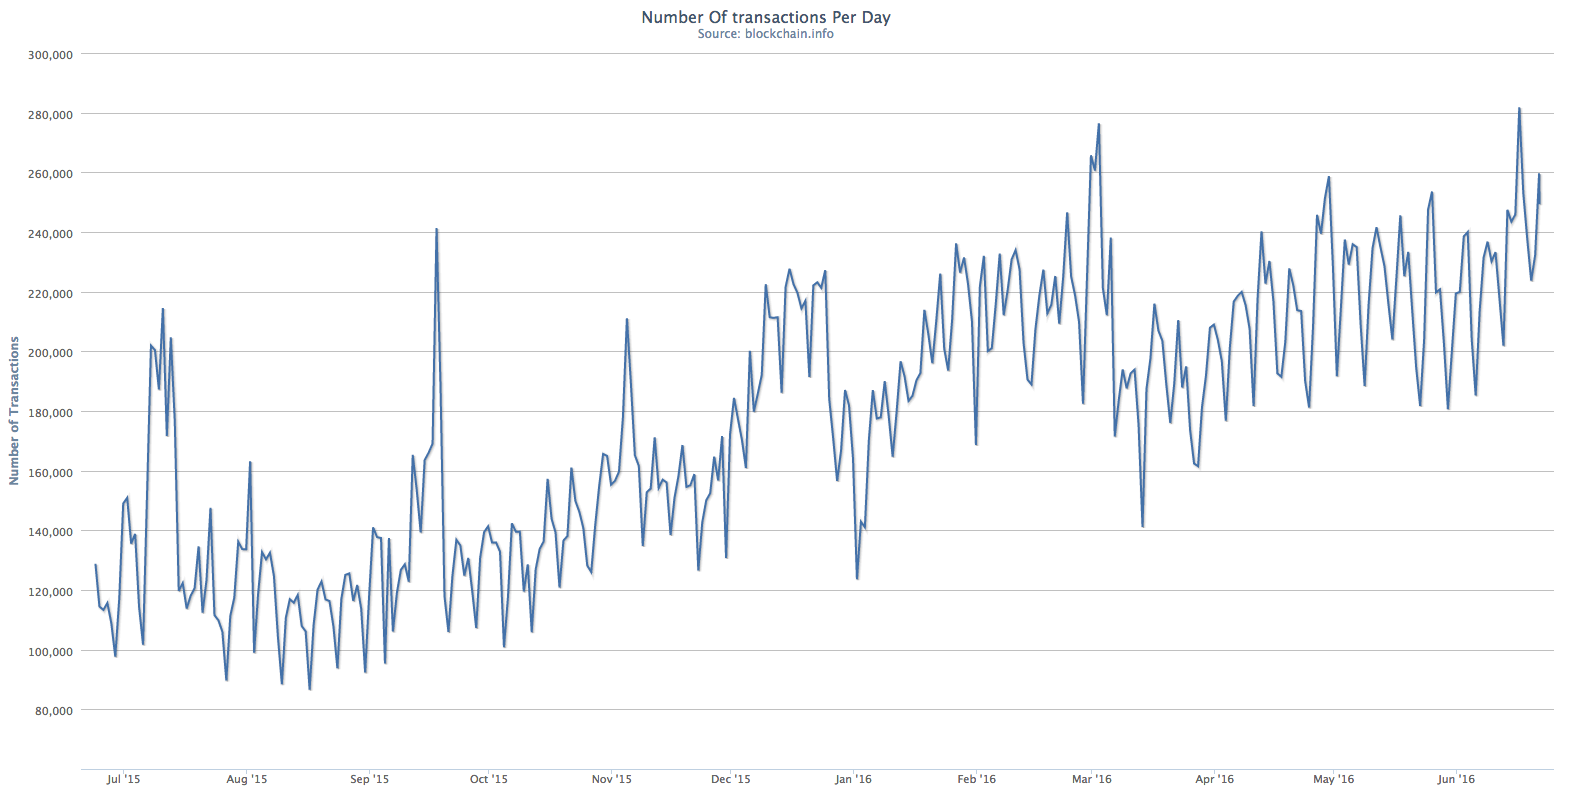 blockchain.info chart showing the number of bitcoin transactions per day